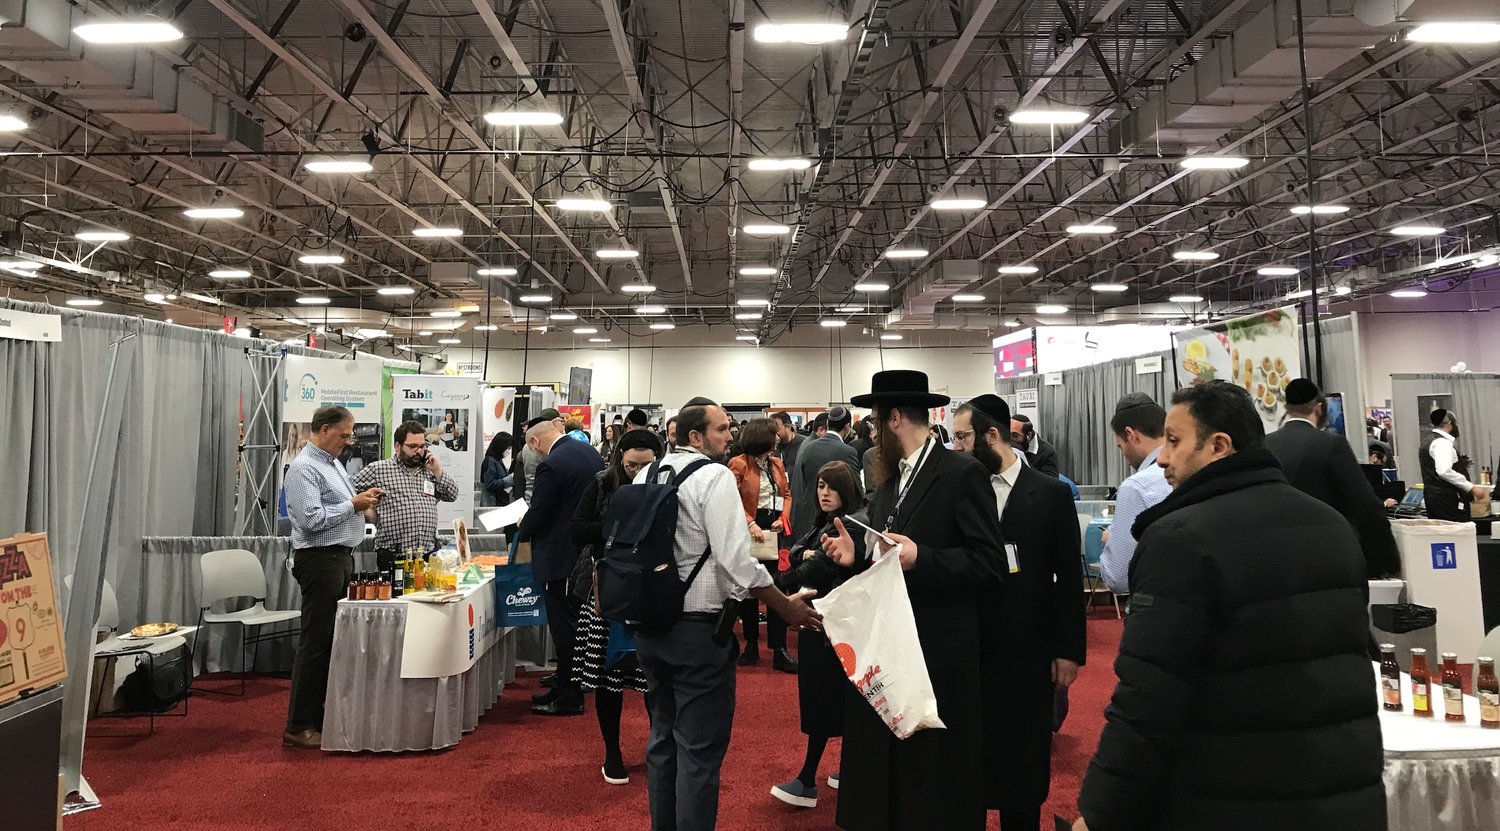 Attendees at Kosherfest, a food industry trade show held in Secaucus, New Jersey, arrive with empty tote bags on each shoulder, ready to fill up with product samples and vendors' business cards, Nov. 9, 2021. (Julia Gergely)